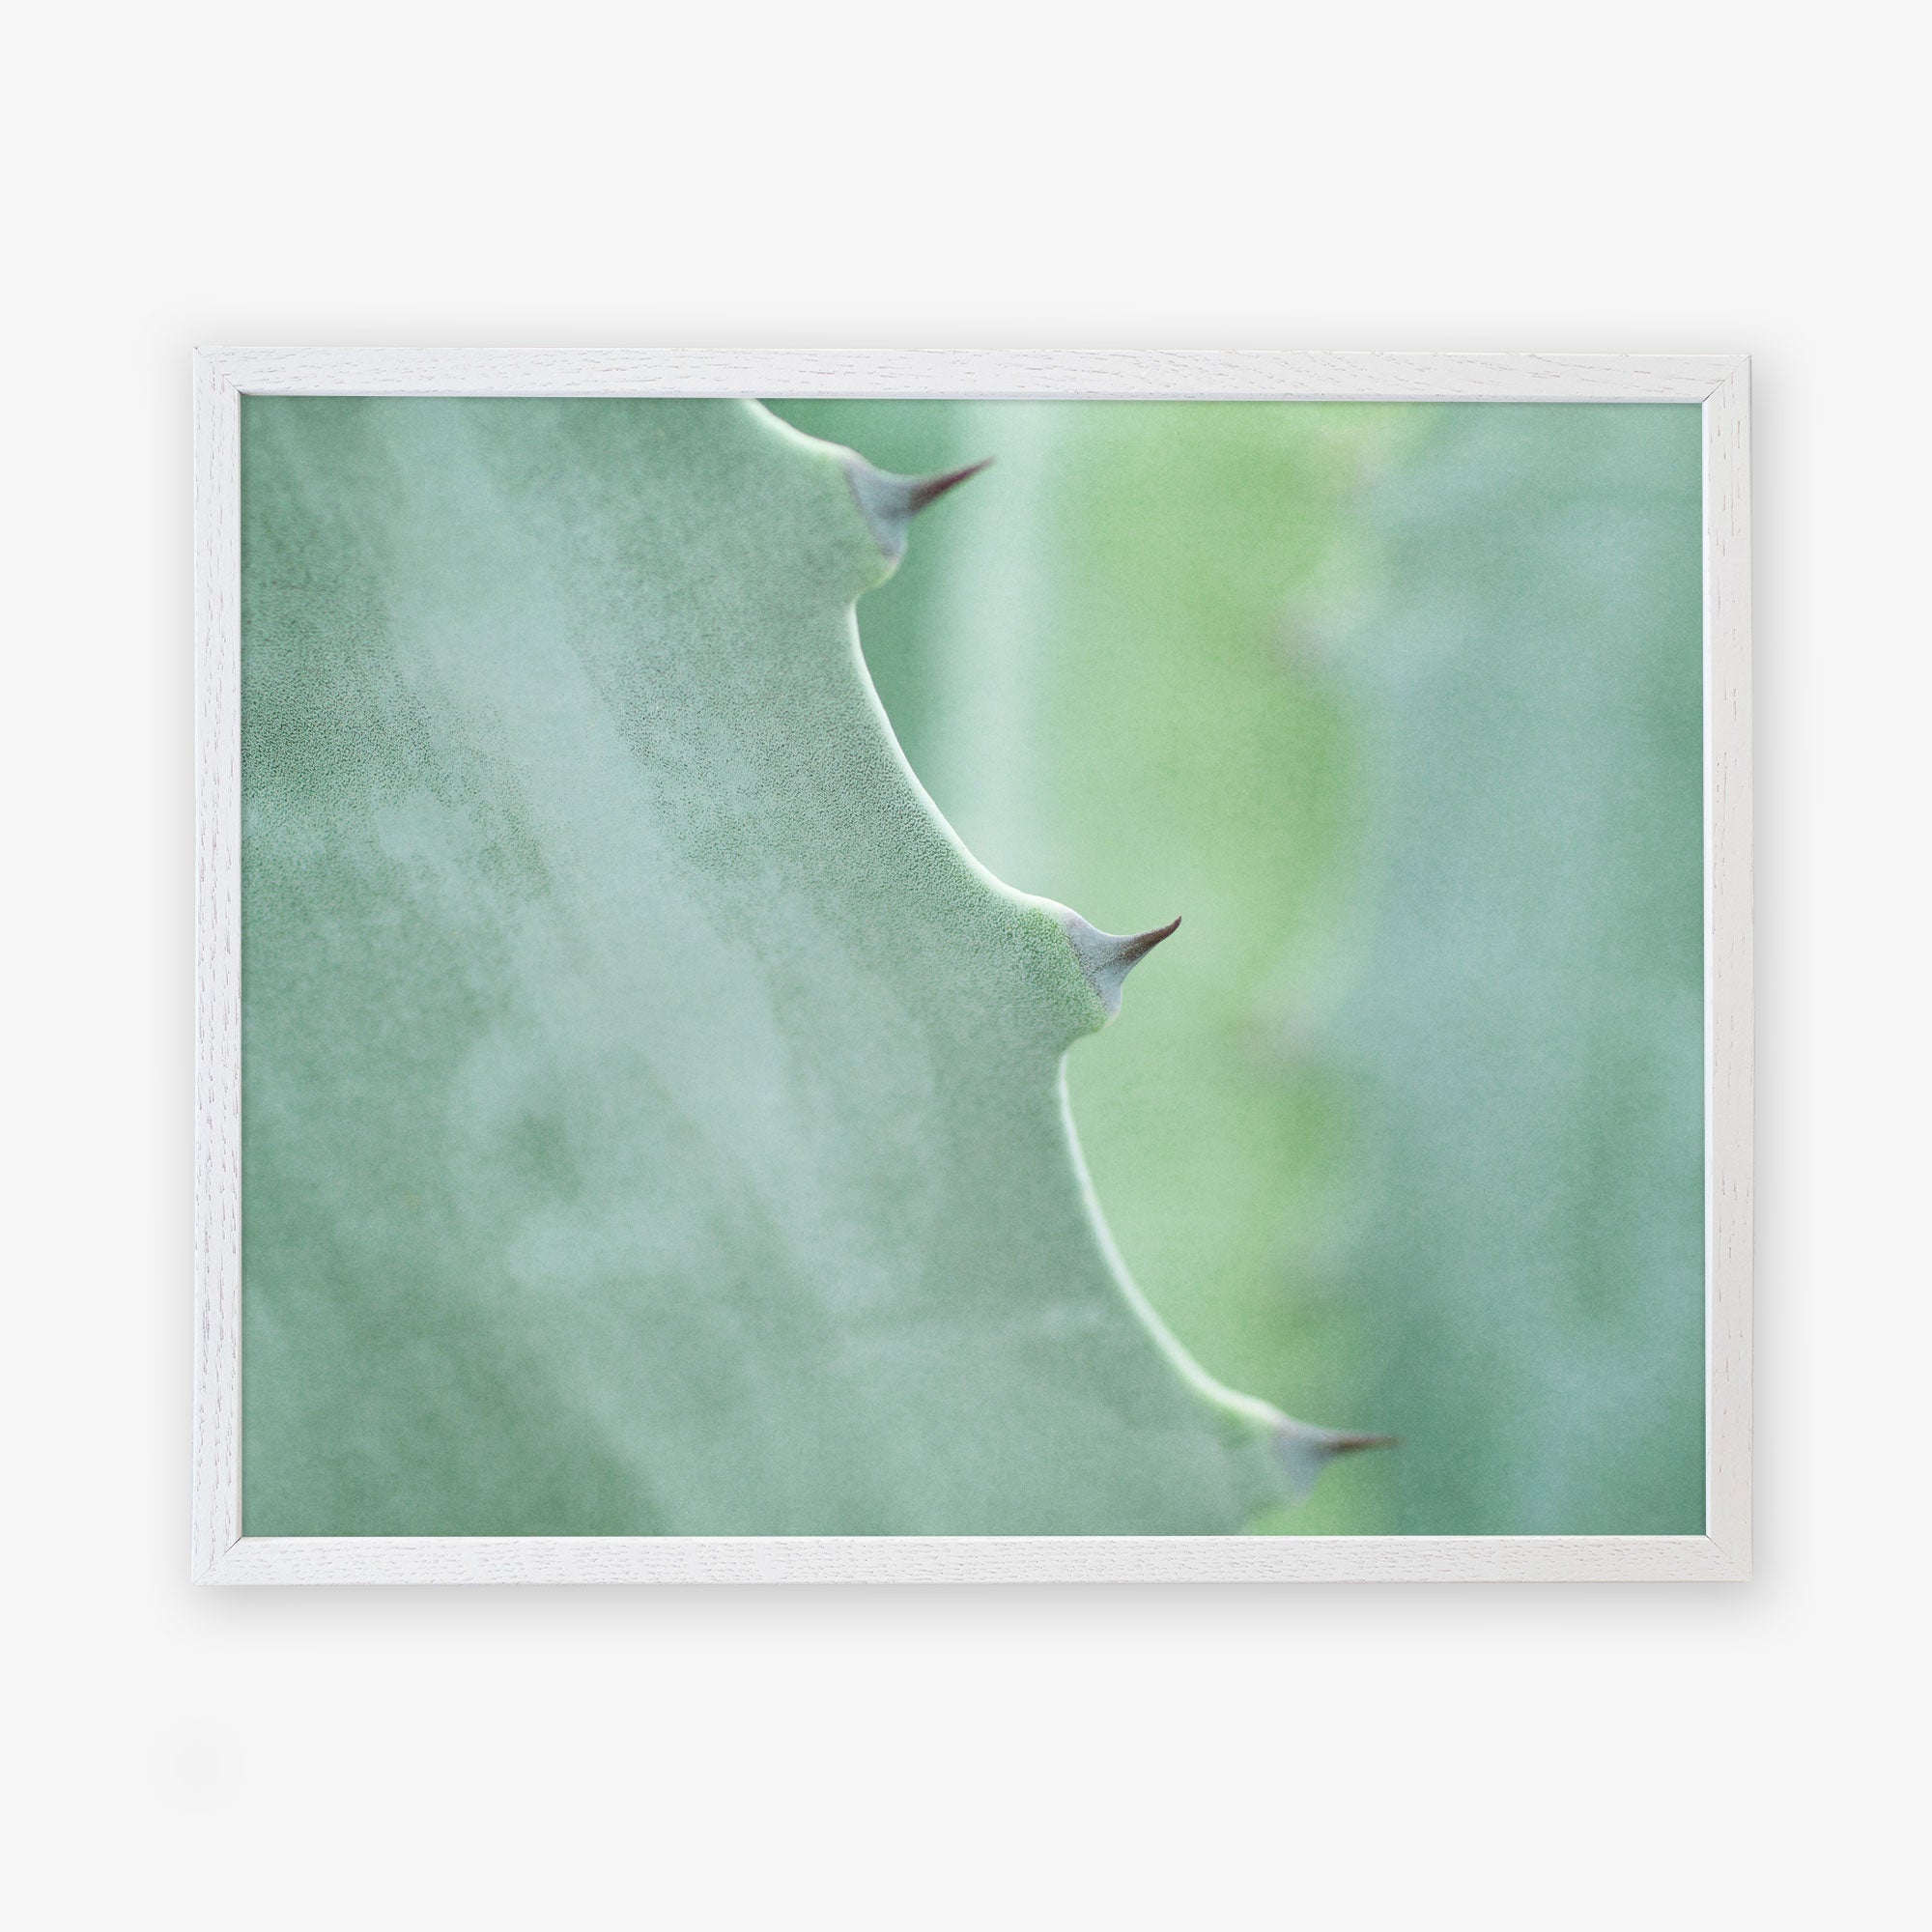 Close-up photo of a green Offley Green Mint Green Botanical Print, &#39;Aloe Vera Spikes&#39; leaf with sharp thorns on its edge, framed by a white border, focusing on the texture and natural details.